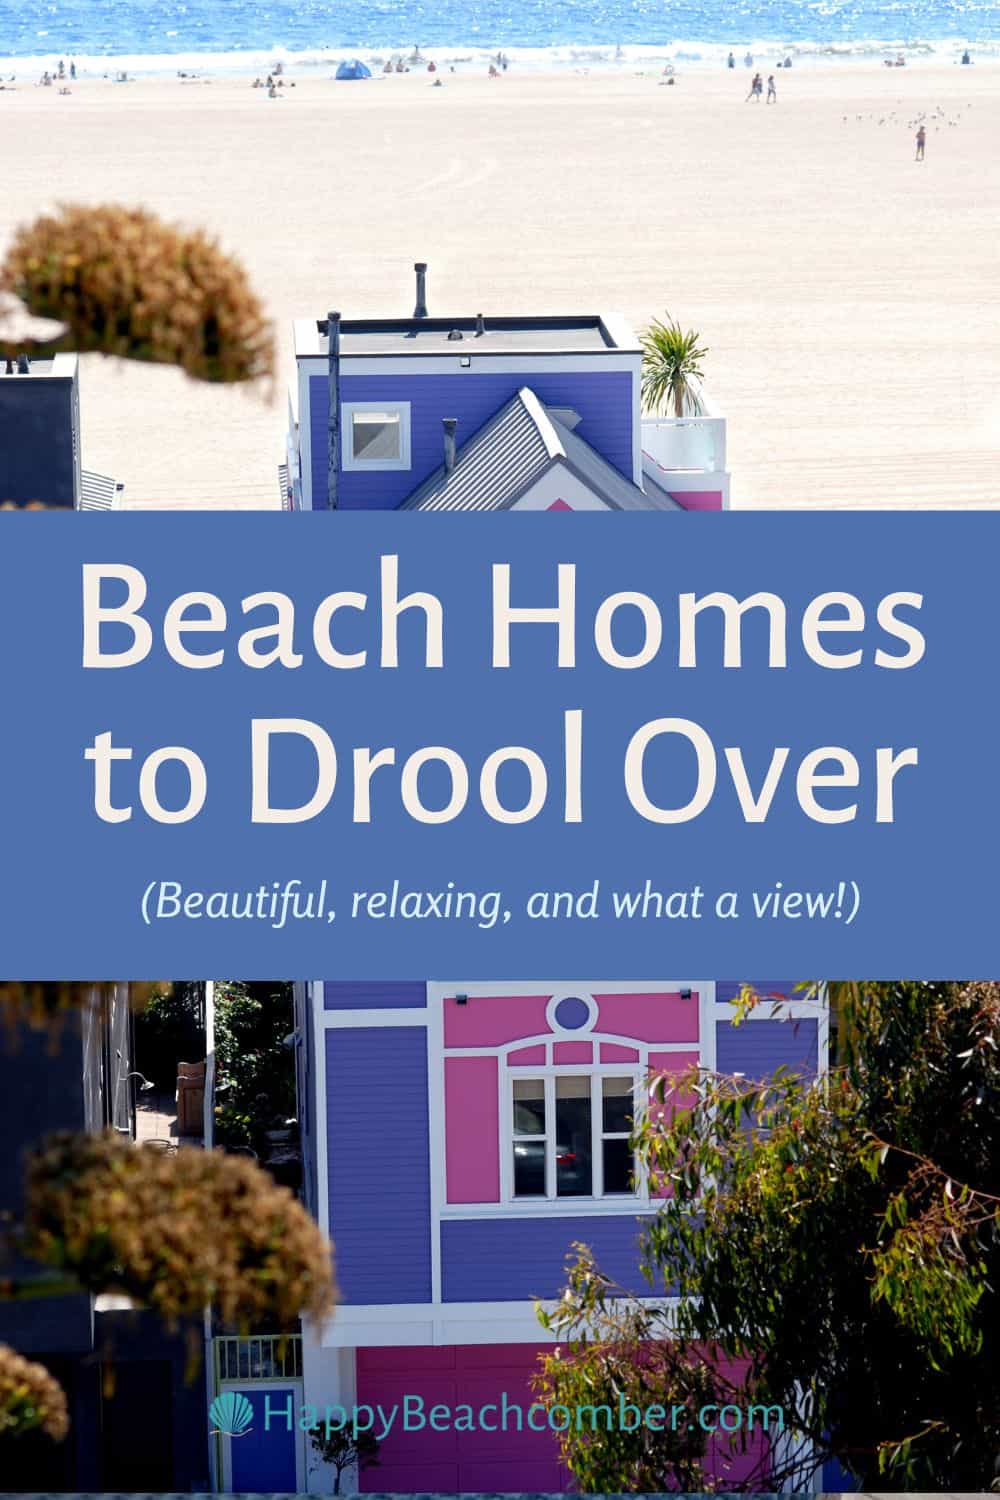 Beach Homes to Drool Over